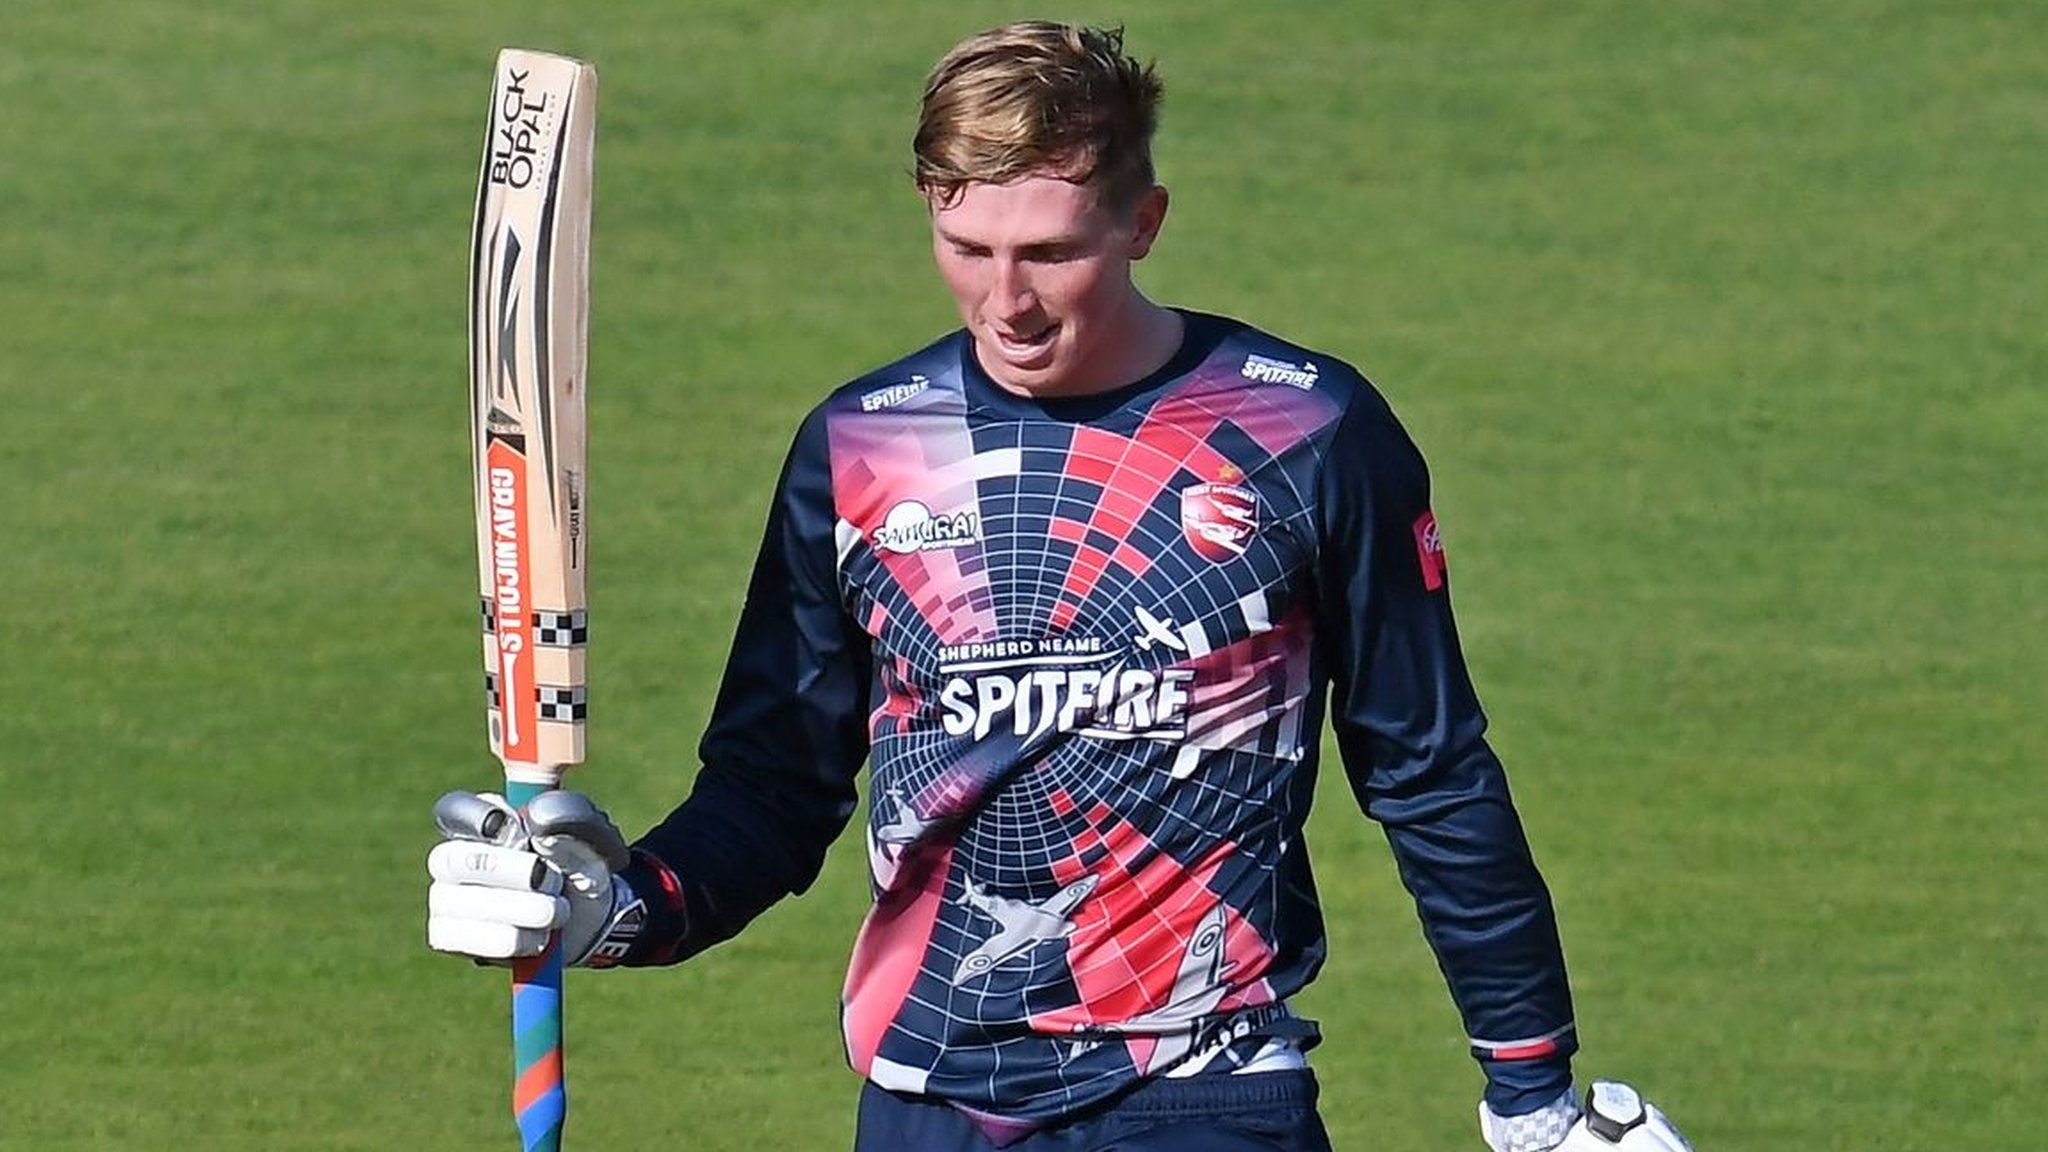 Zak Crawley's previous best in T20 cricket was 89 against Essex at Chelmsford in August 2019